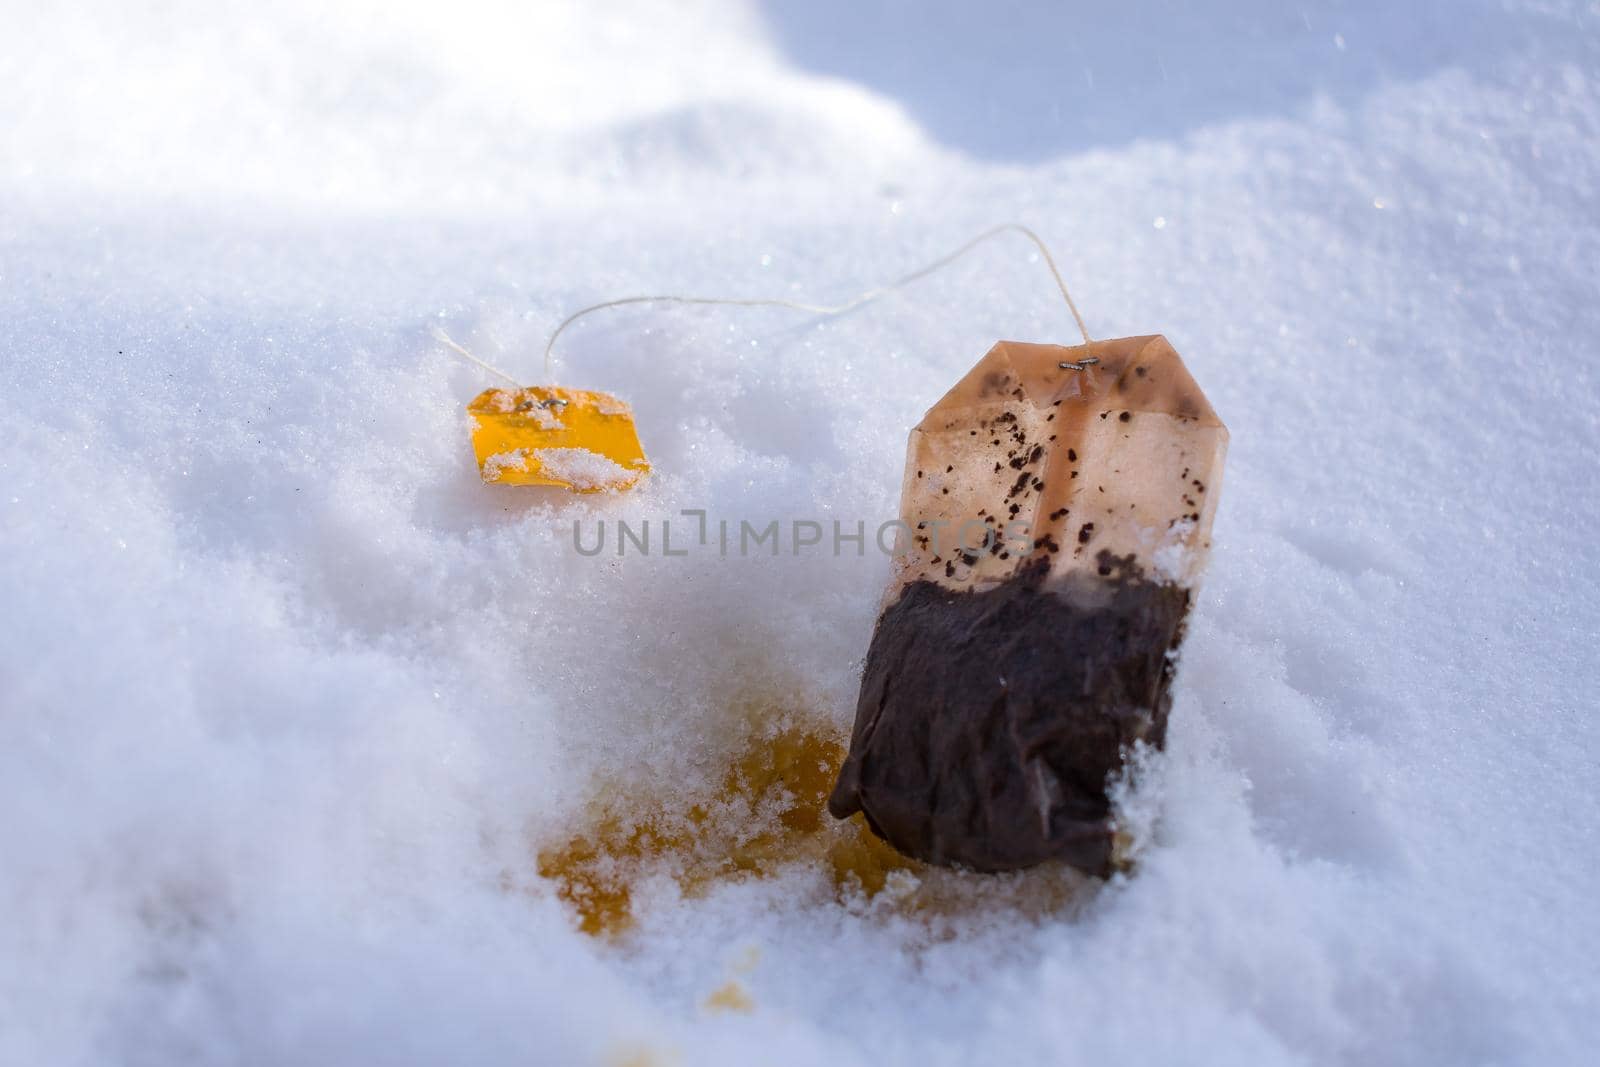 A used tea bag lies in the snow like rubbish and pollutes the environment